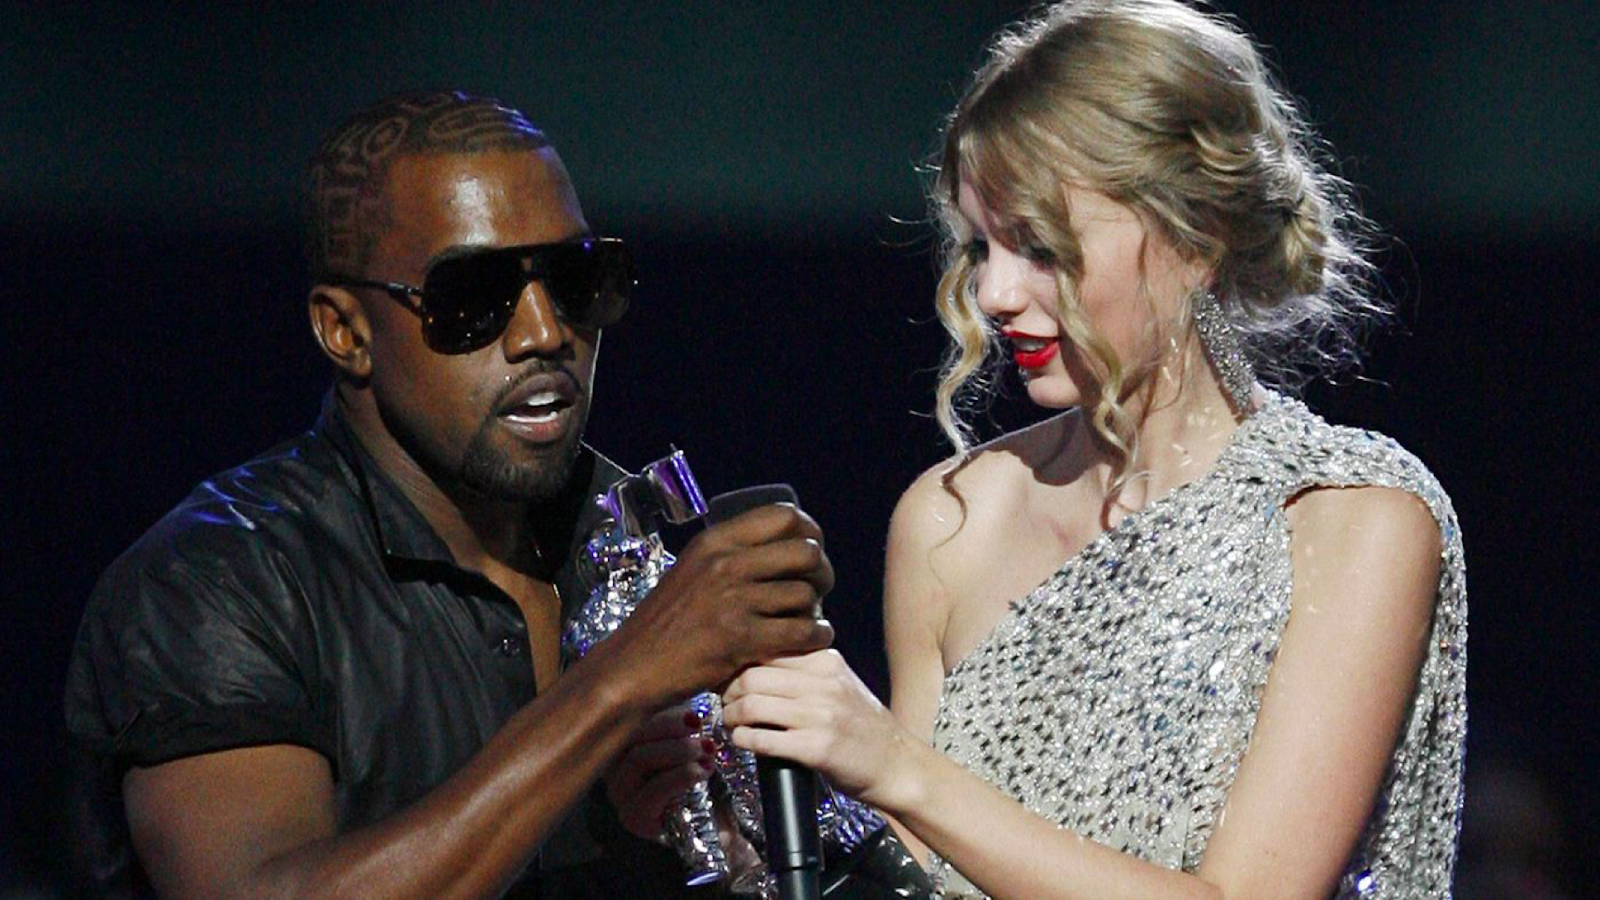 Kanye West and Taylor Swift Controversy